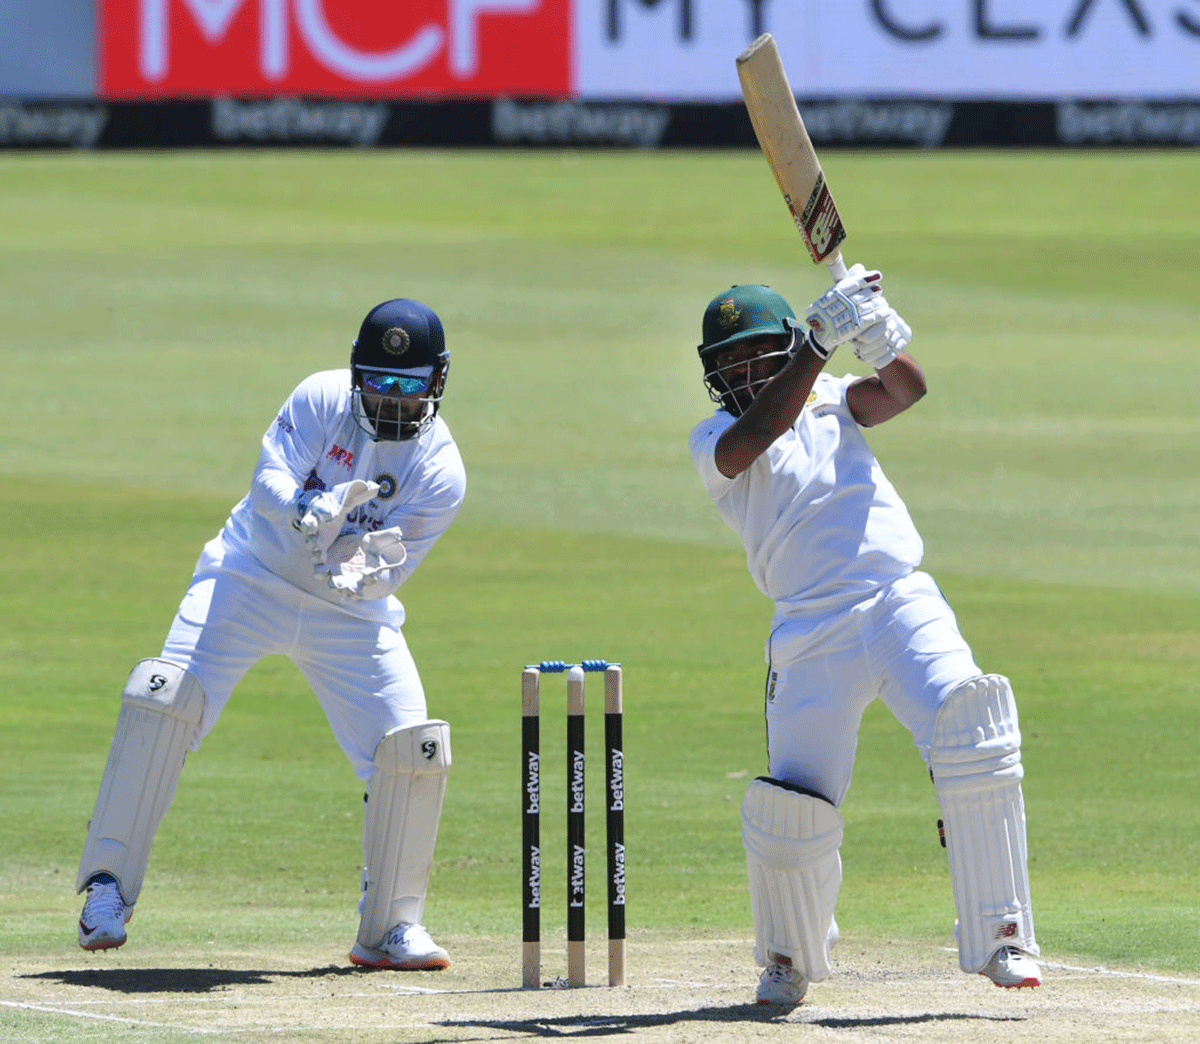 Temba Bavuma top-scored for South Africa in their first innings with 52